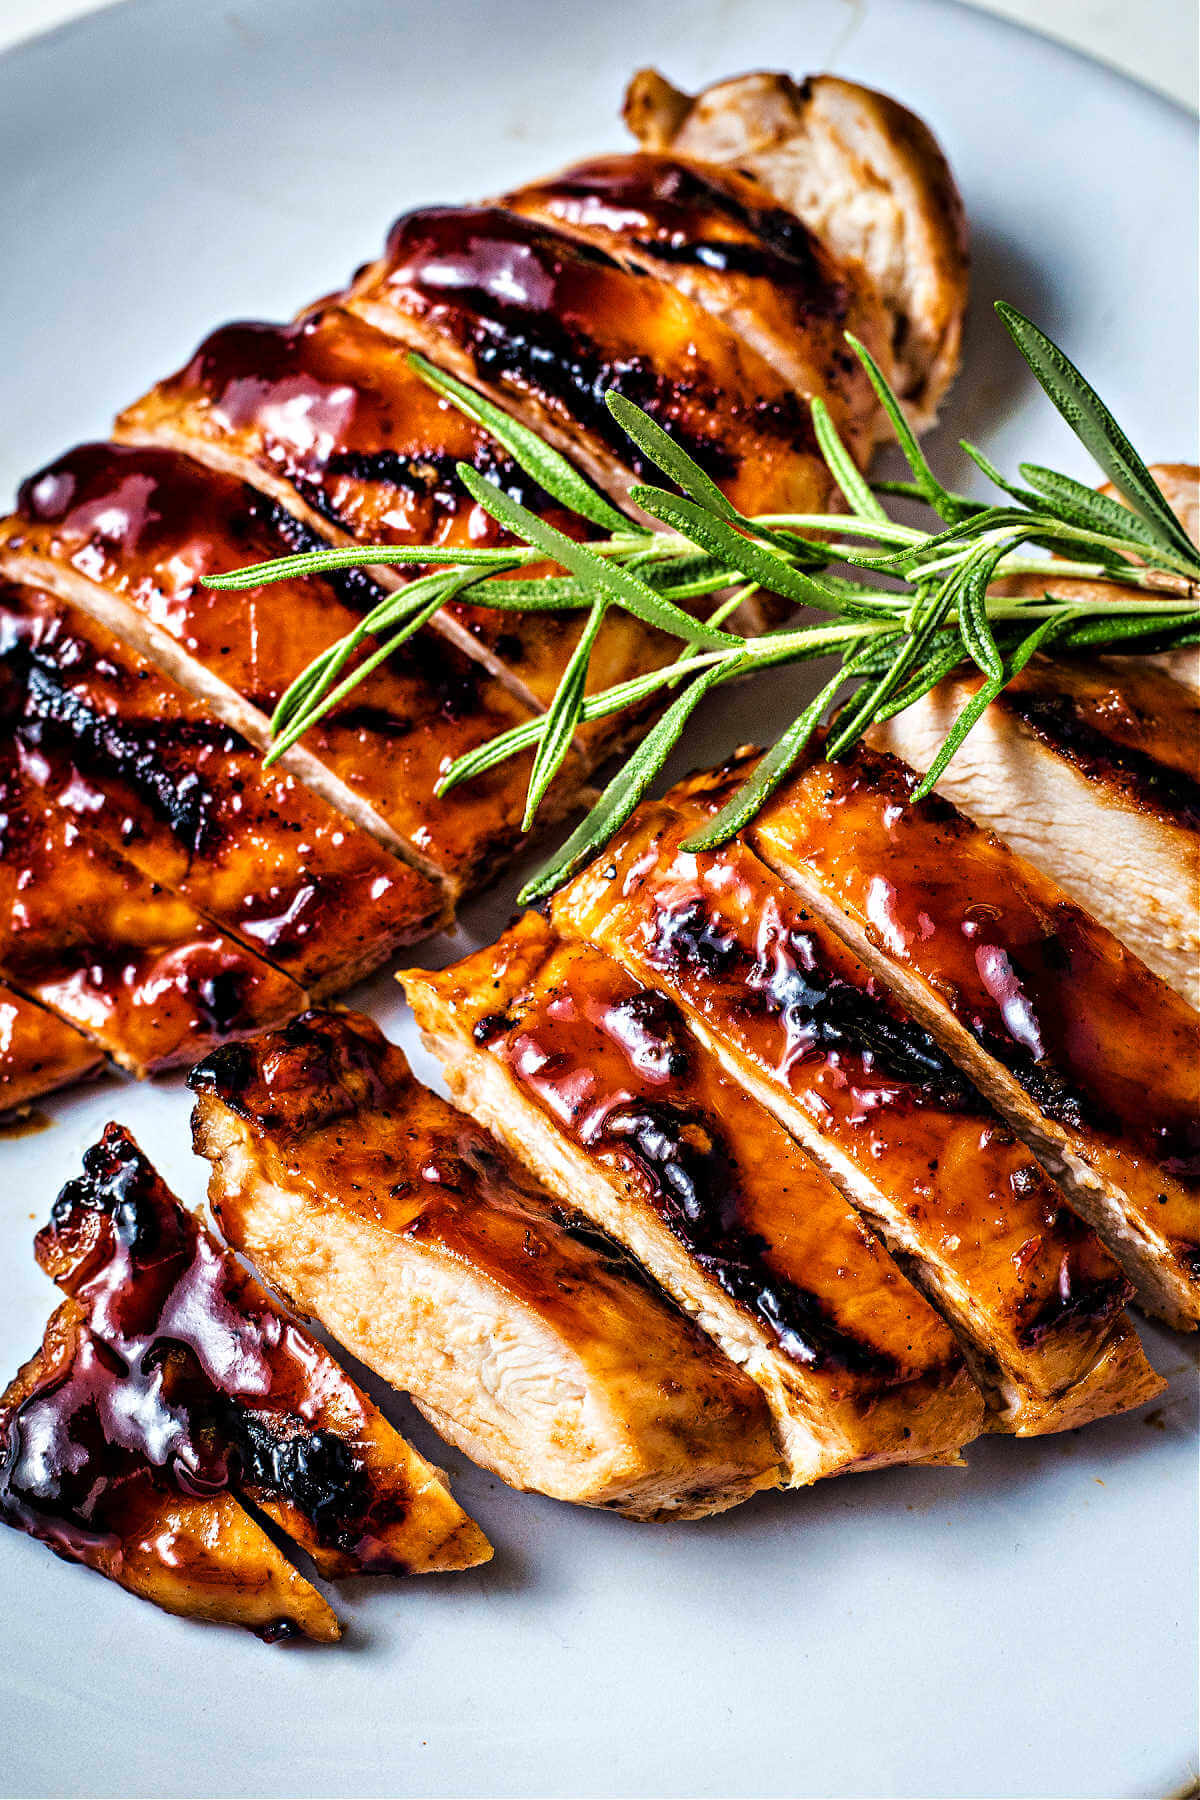 sliced grilled balsamic chicken on a plate garnished with fresh rosemary.